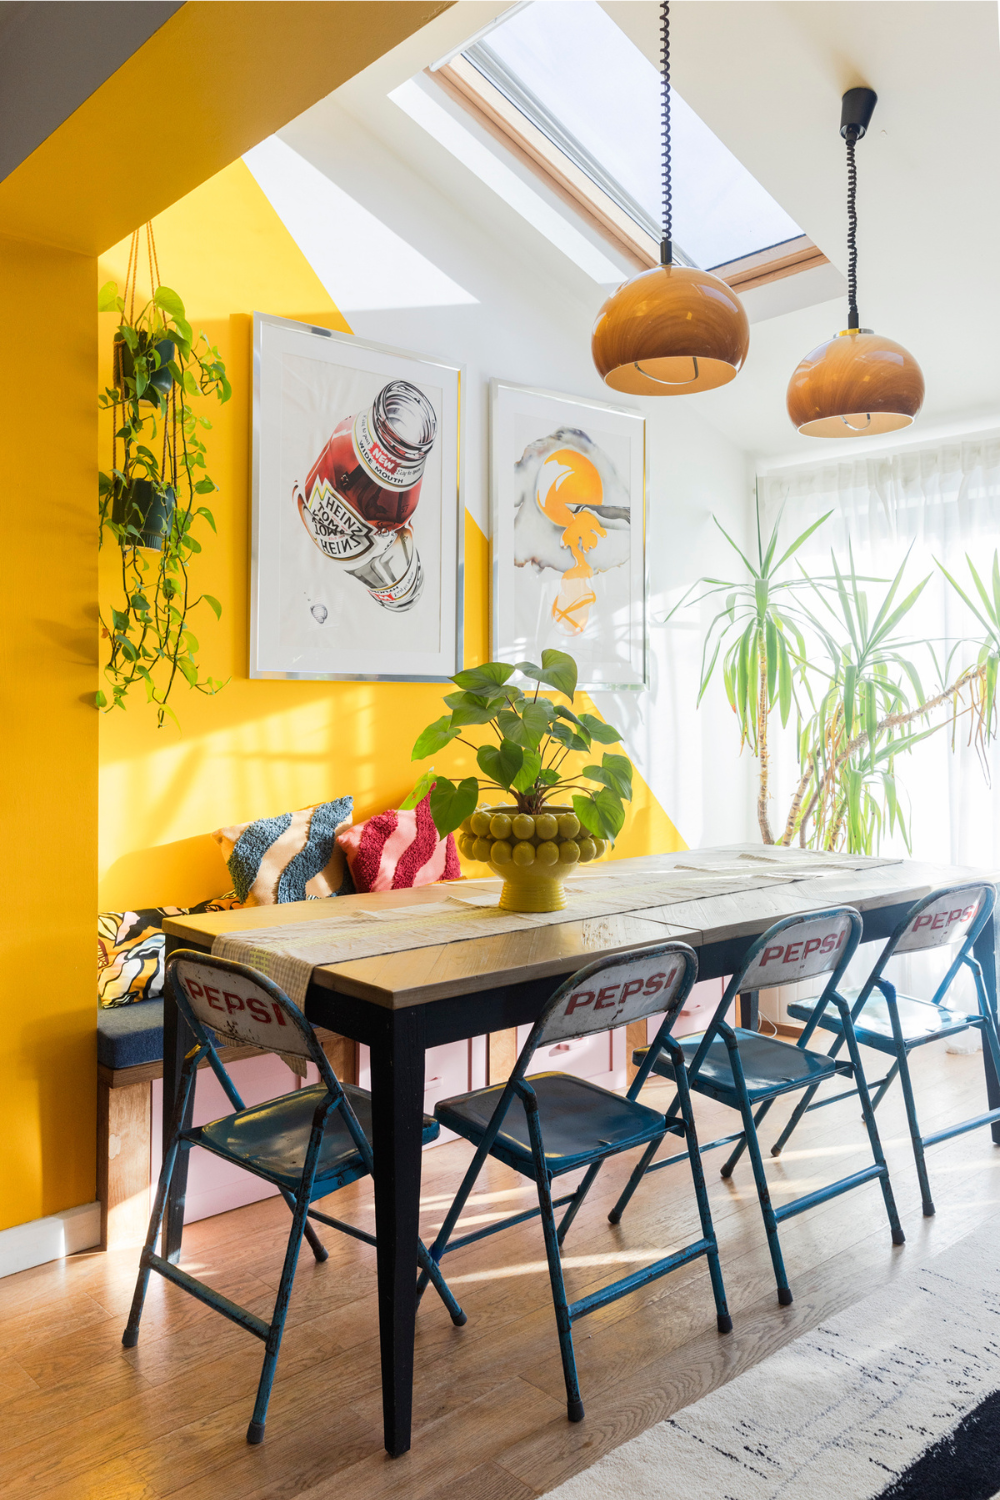 In a yellow dining room there is a large table positioned under a skylight. Vintage metal chairs with the Pepsi logo are tucked around the table.